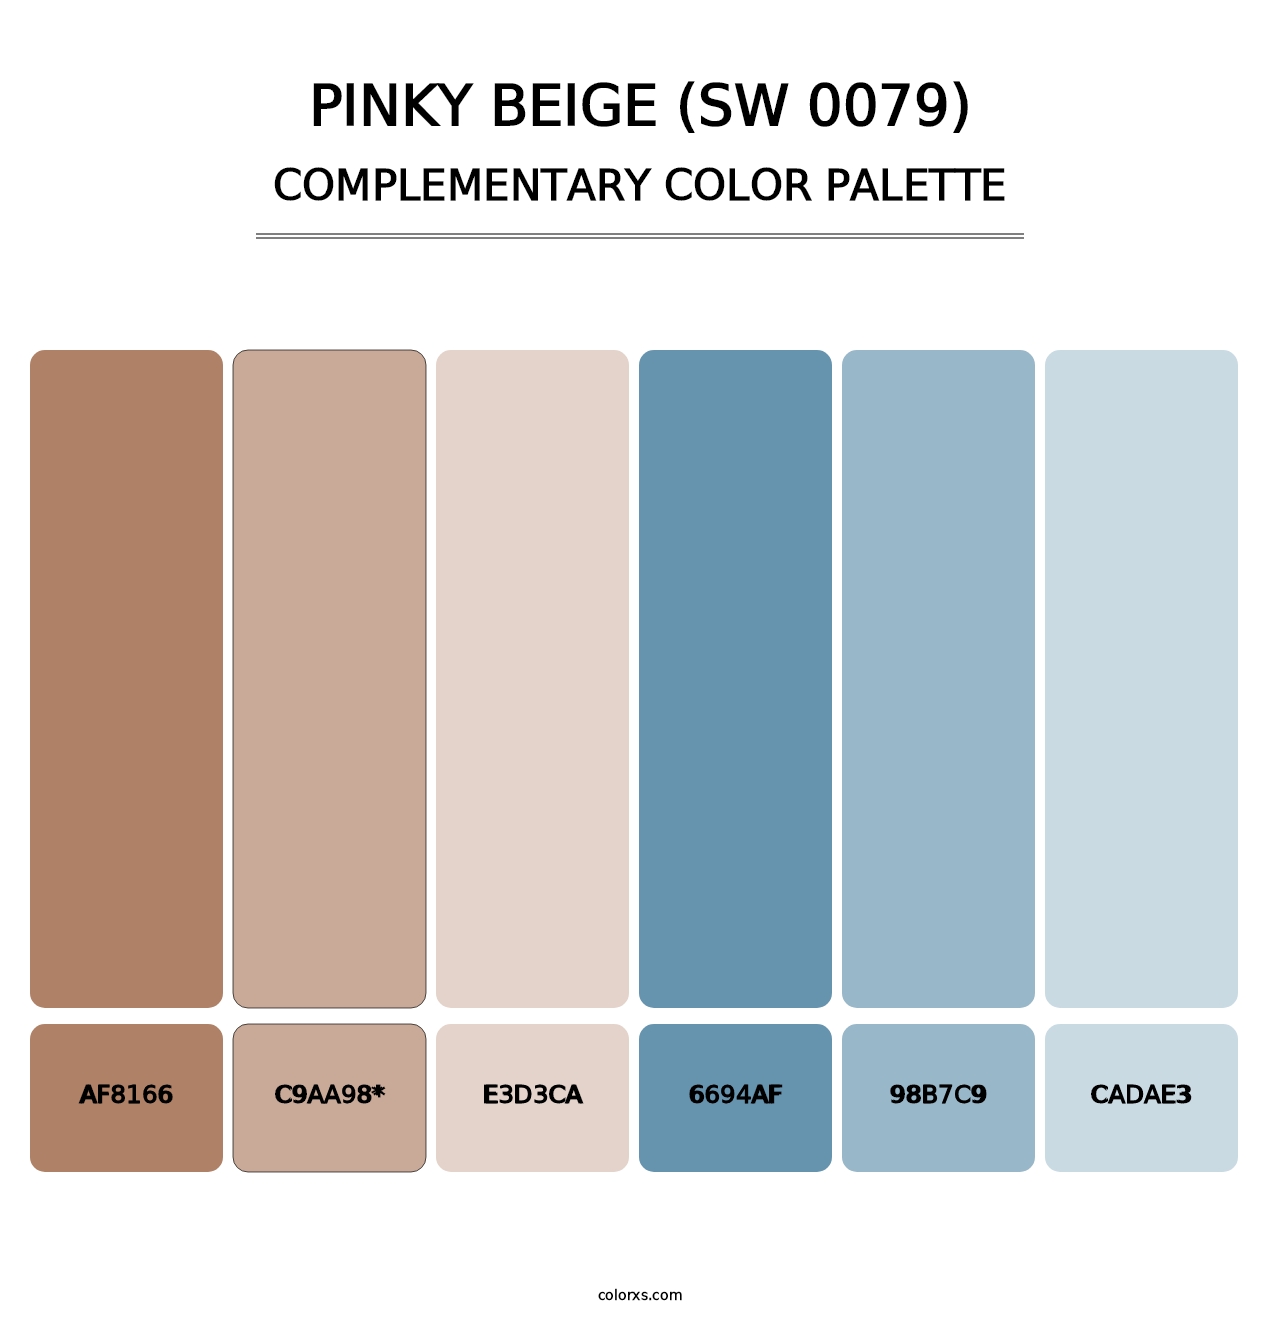 Pinky Beige (SW 0079) - Complementary Color Palette